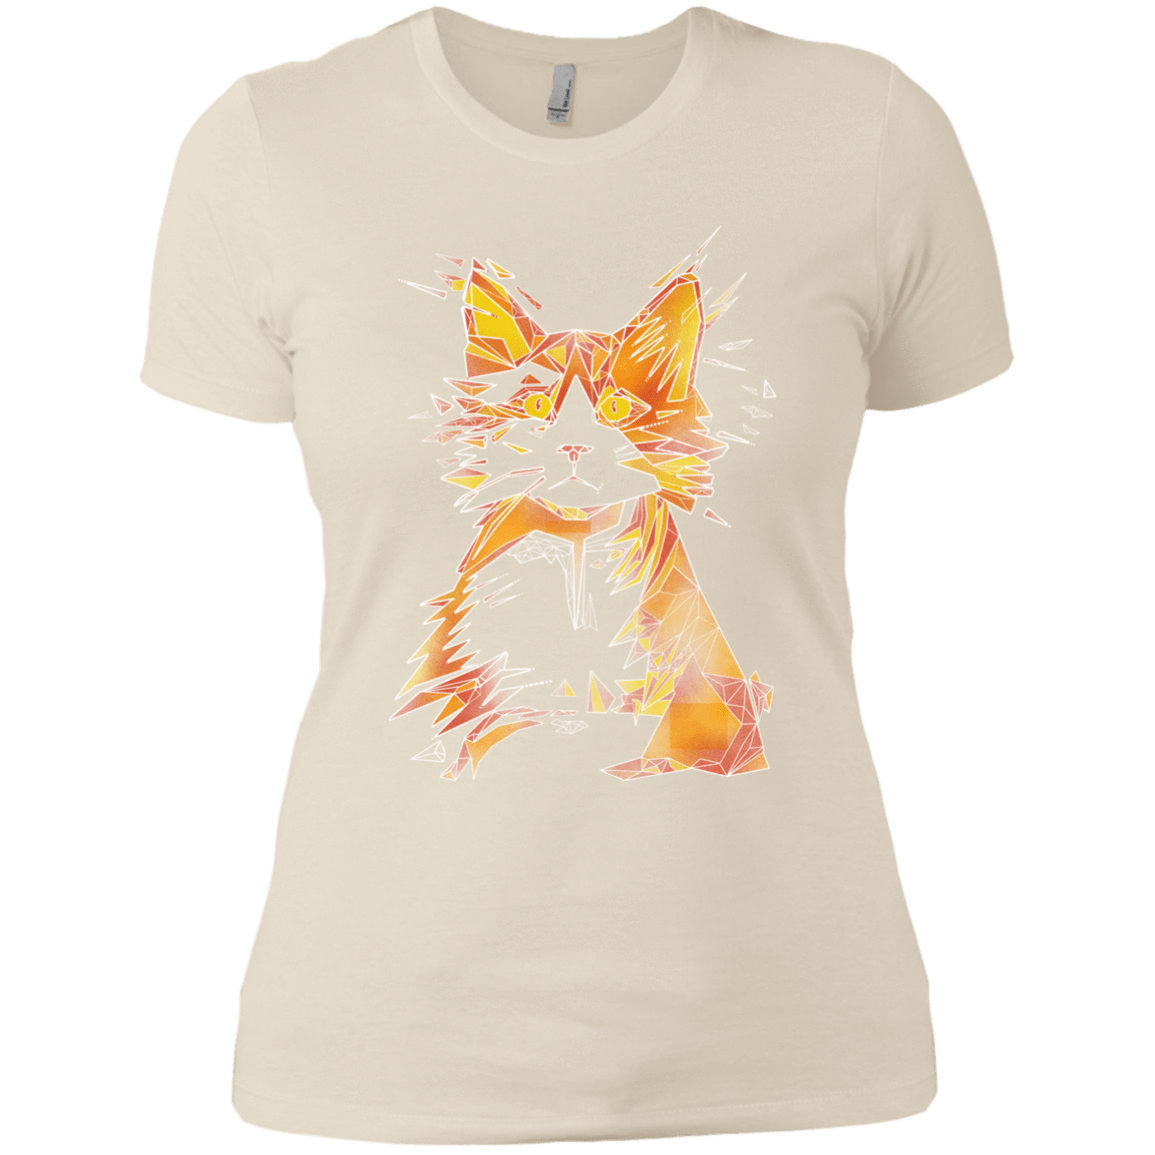 T-Shirts Ivory/ / X-Small Scattered Women's Premium T-Shirt